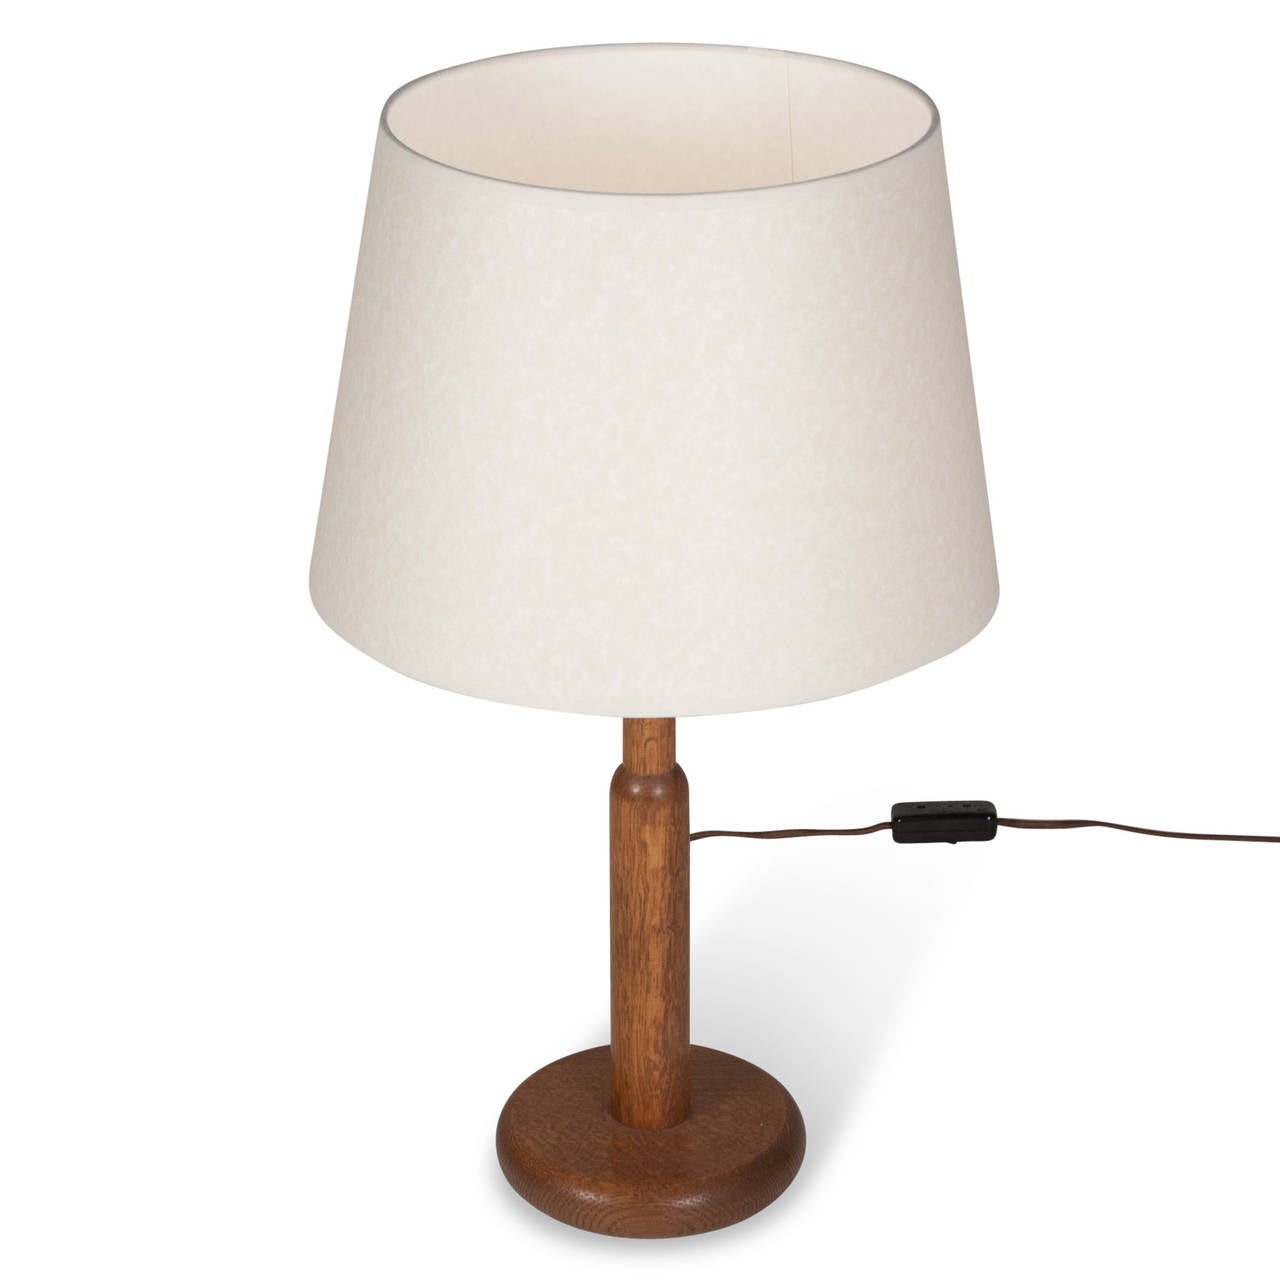 American Turned Elm Wood Table Lamp For Sale